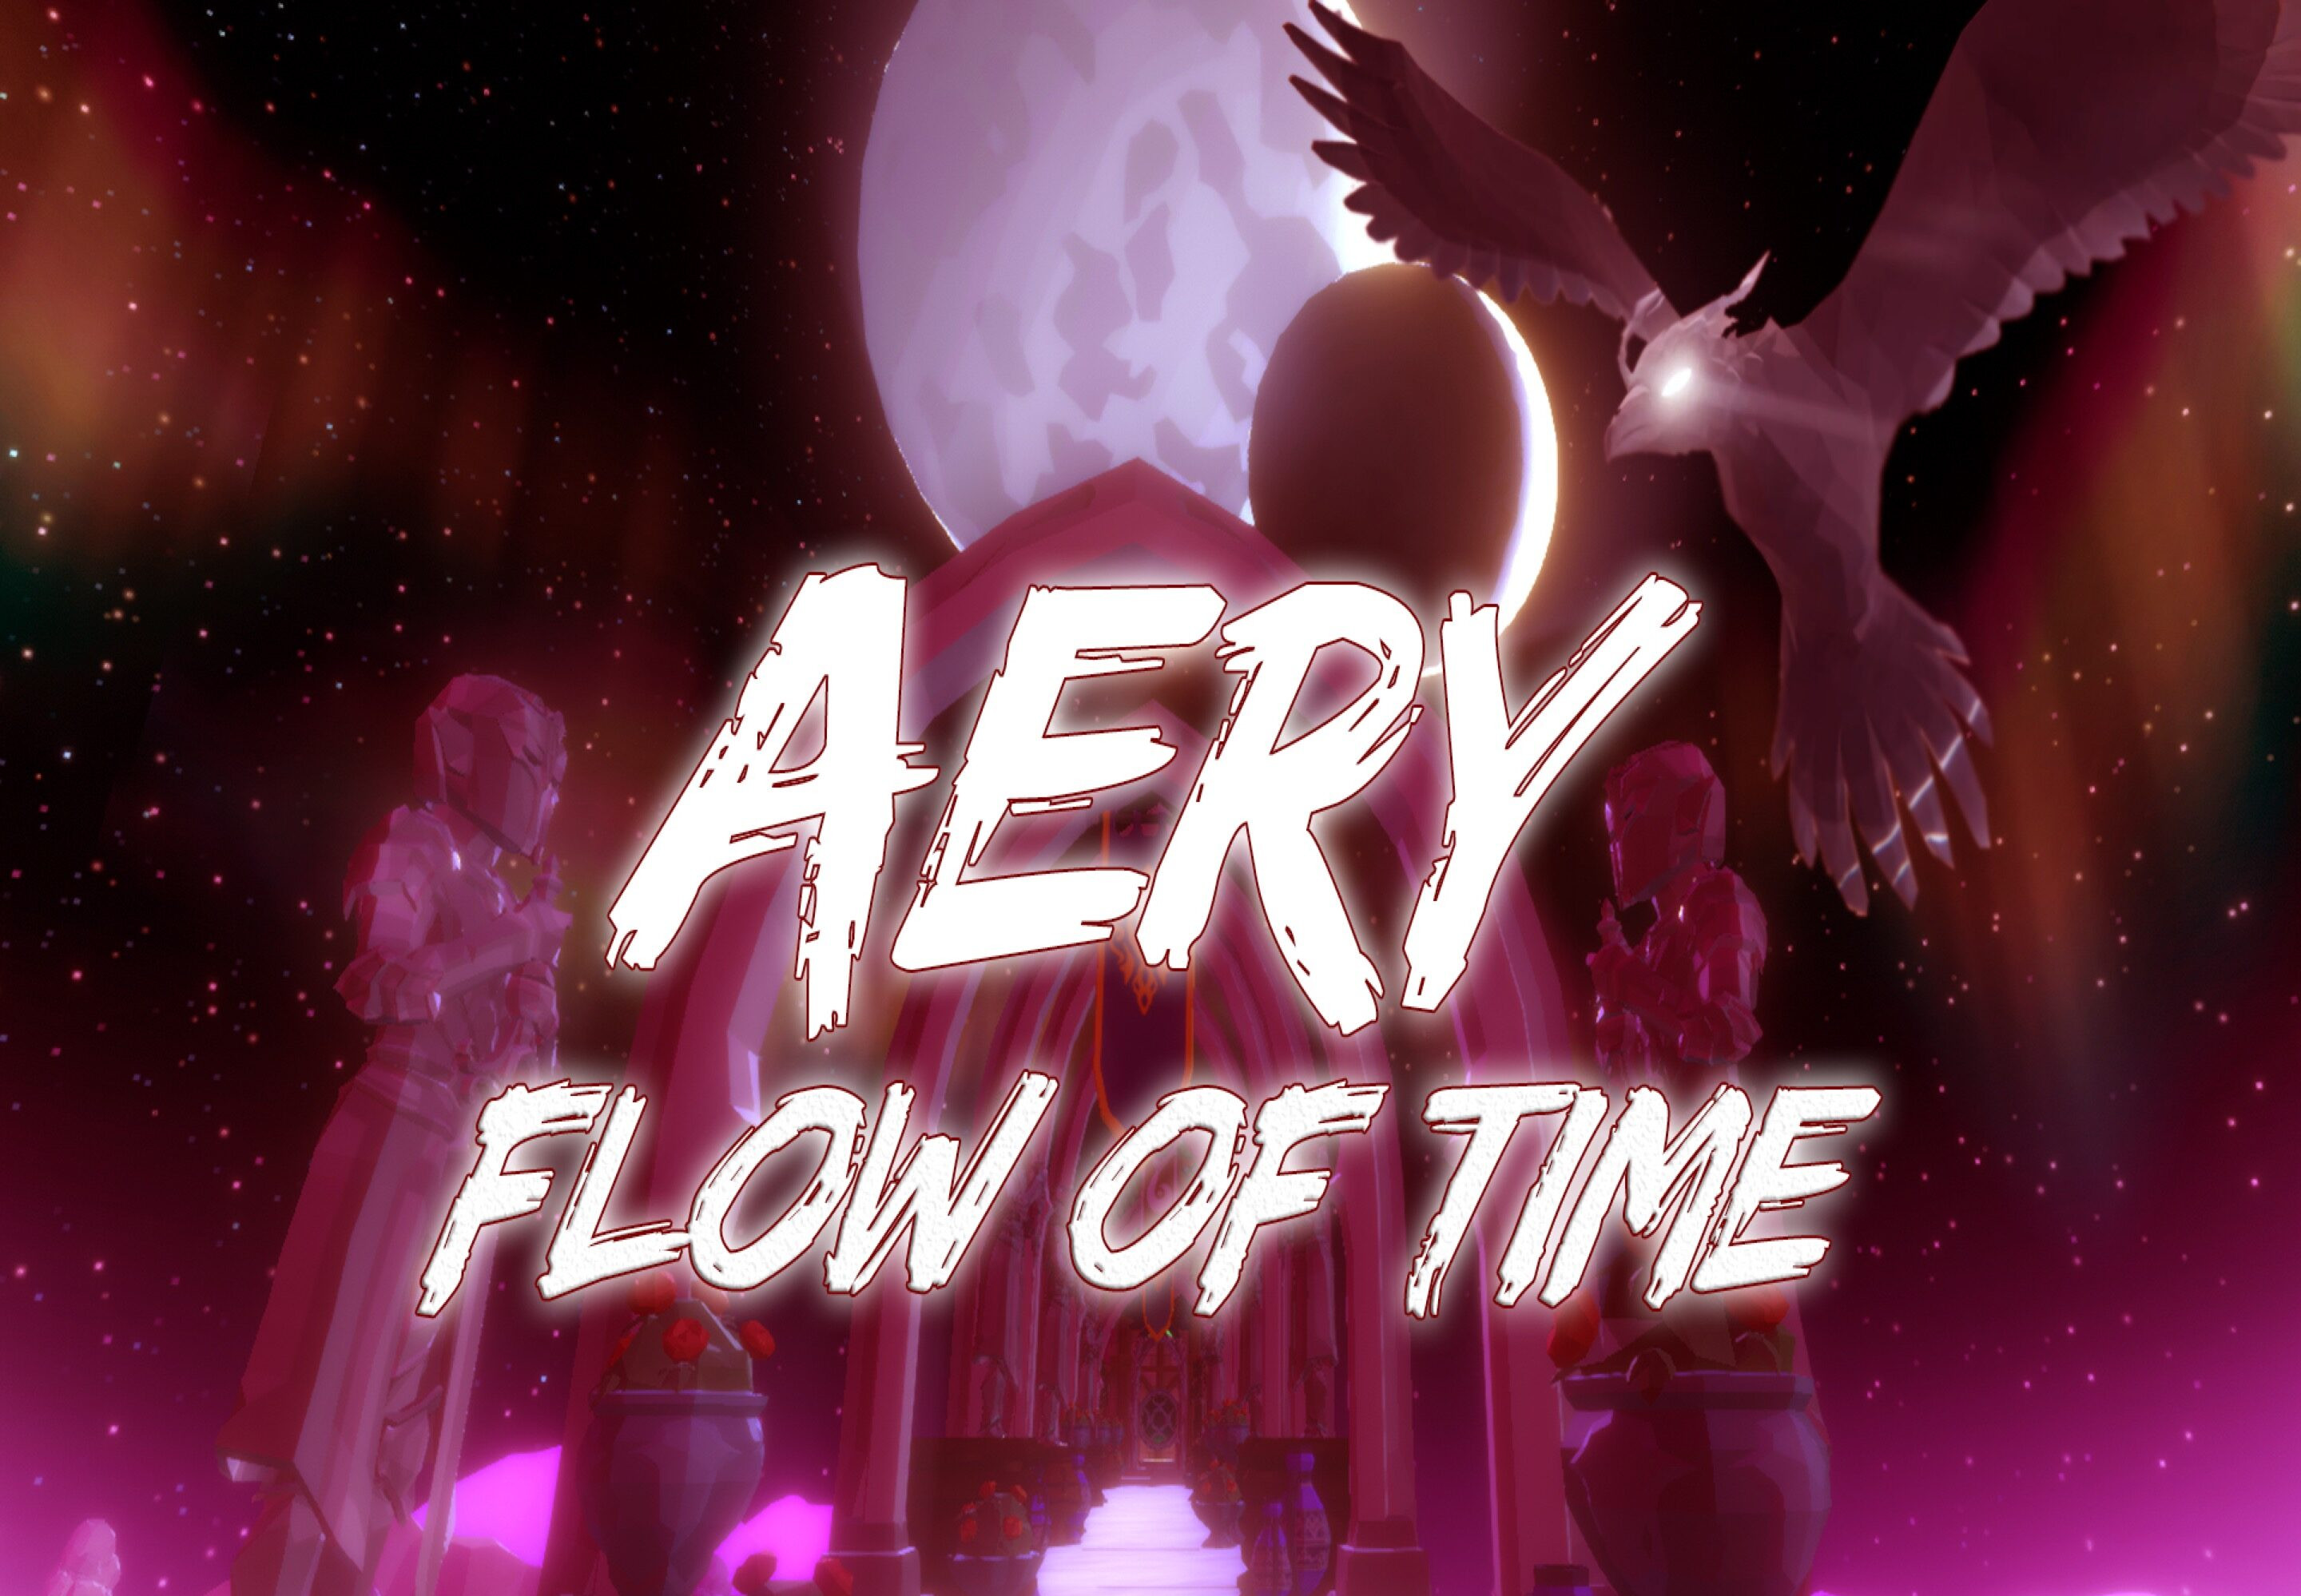 Aery - Flow Of Time Steam CD Key